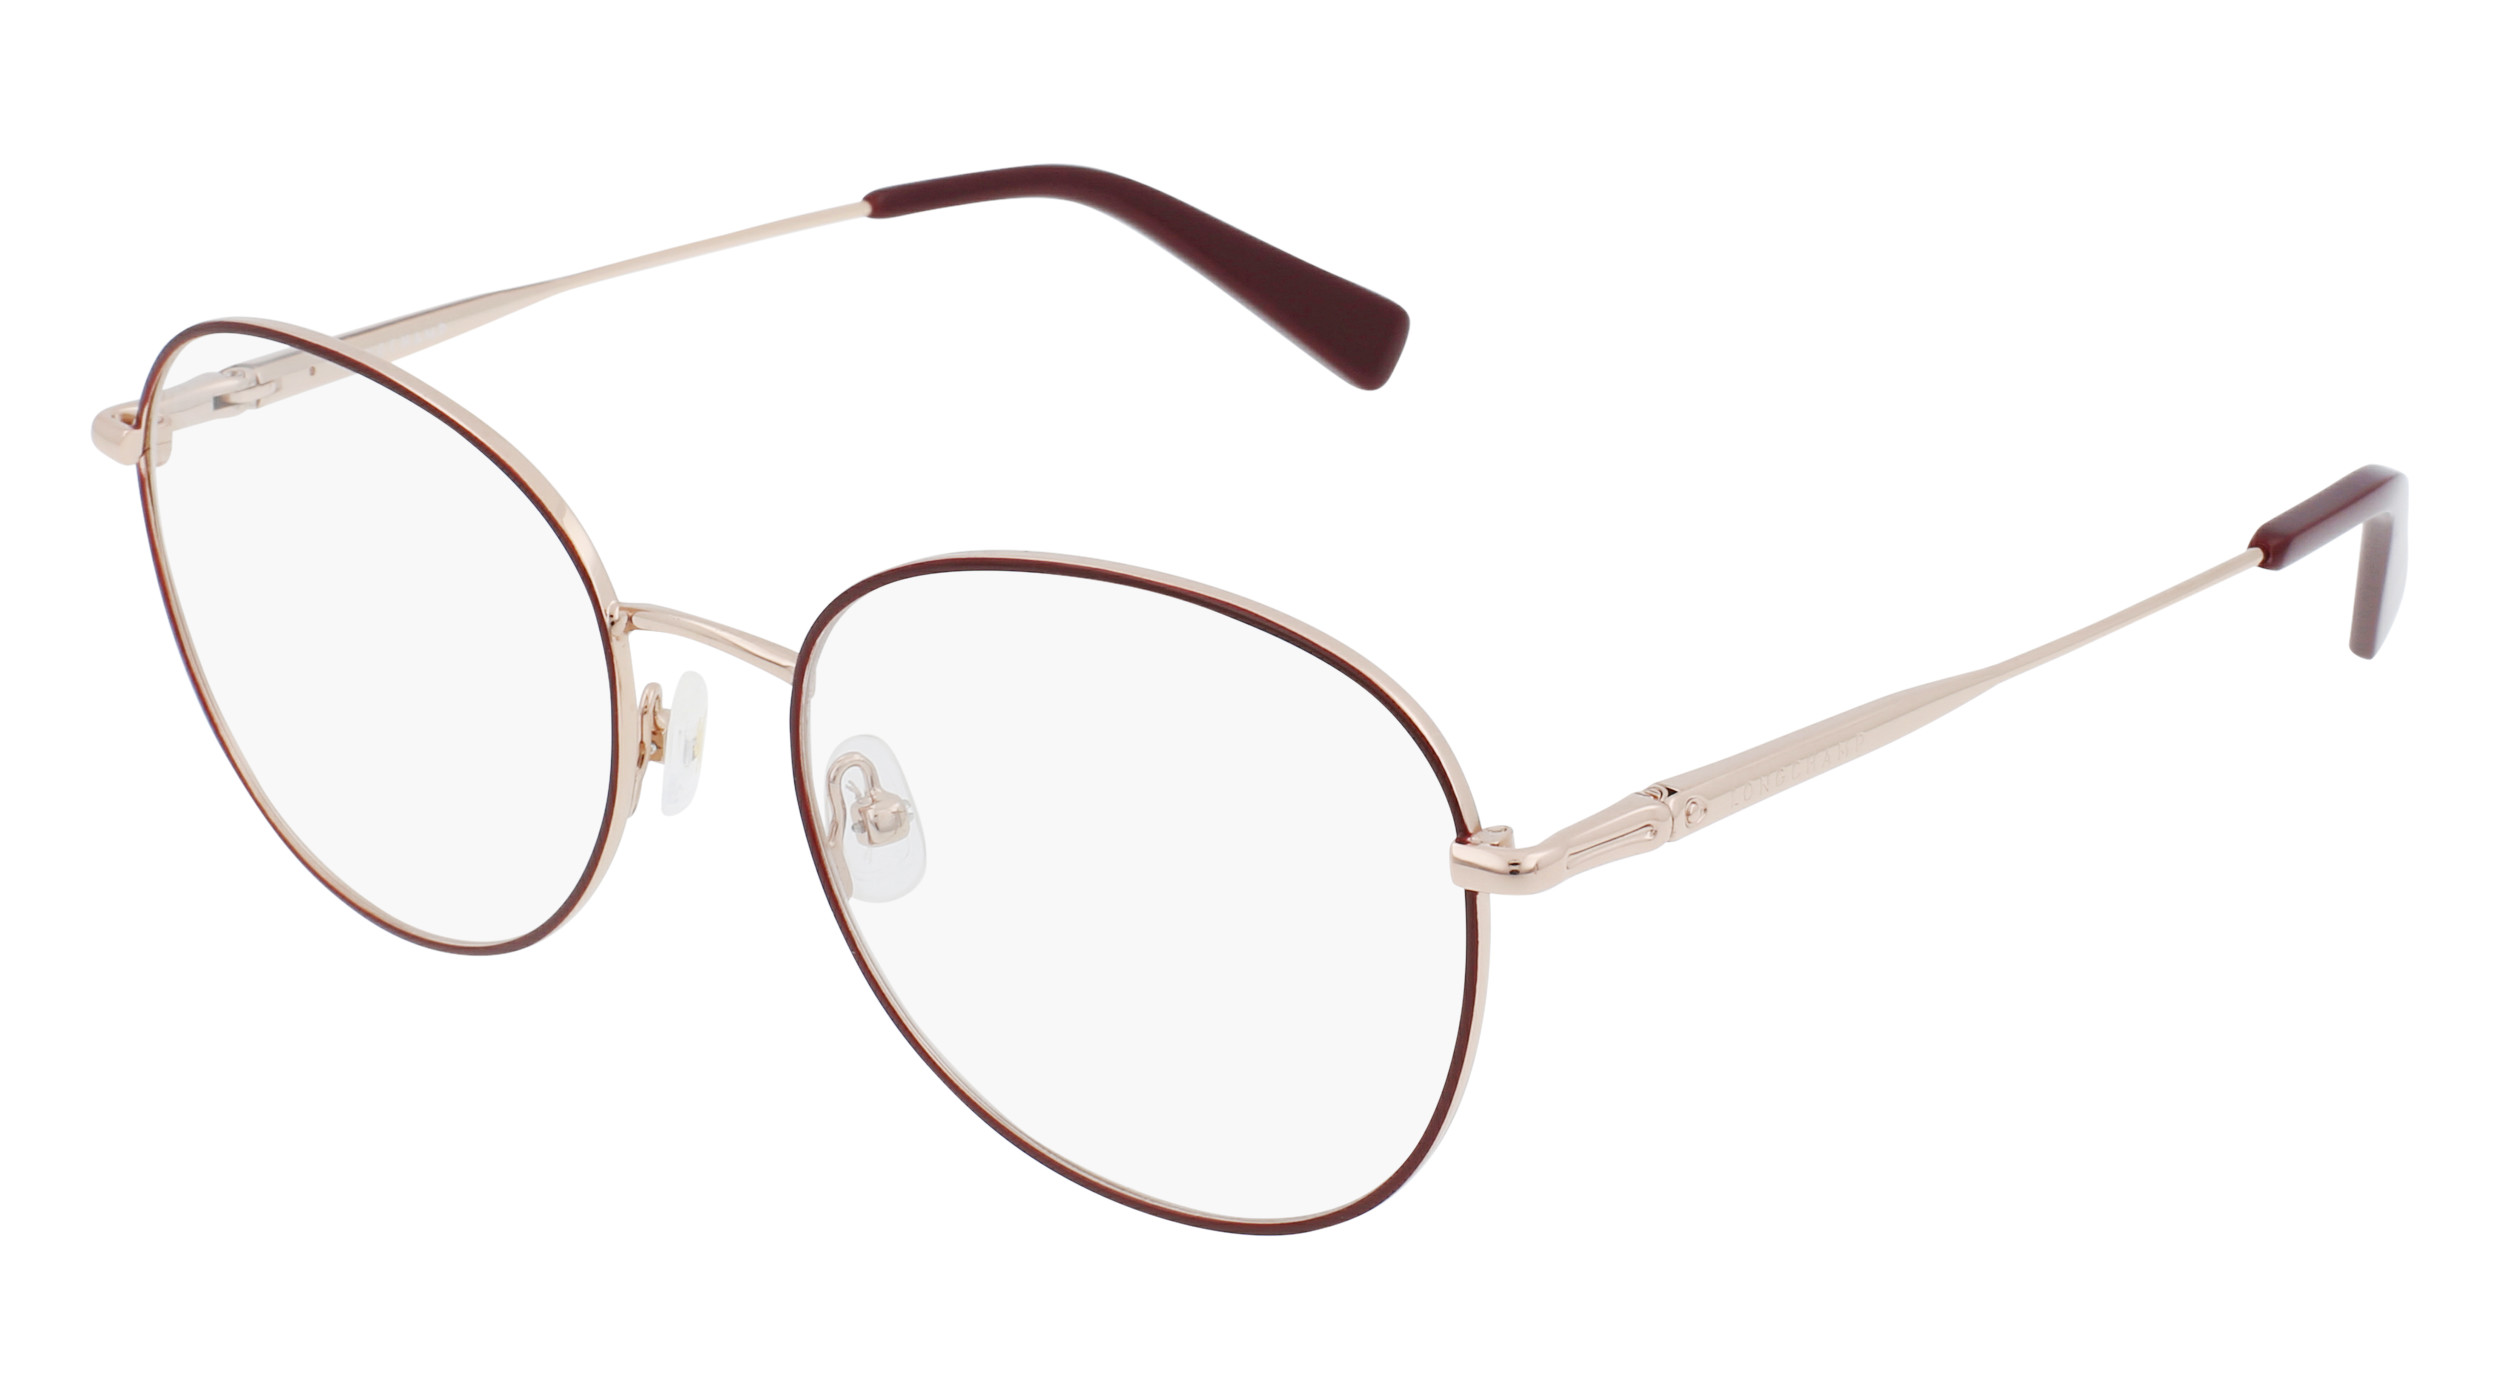 Tomford Thin White Gold Frame With Sienna Frame Eyeglasses By G&M Eyecare